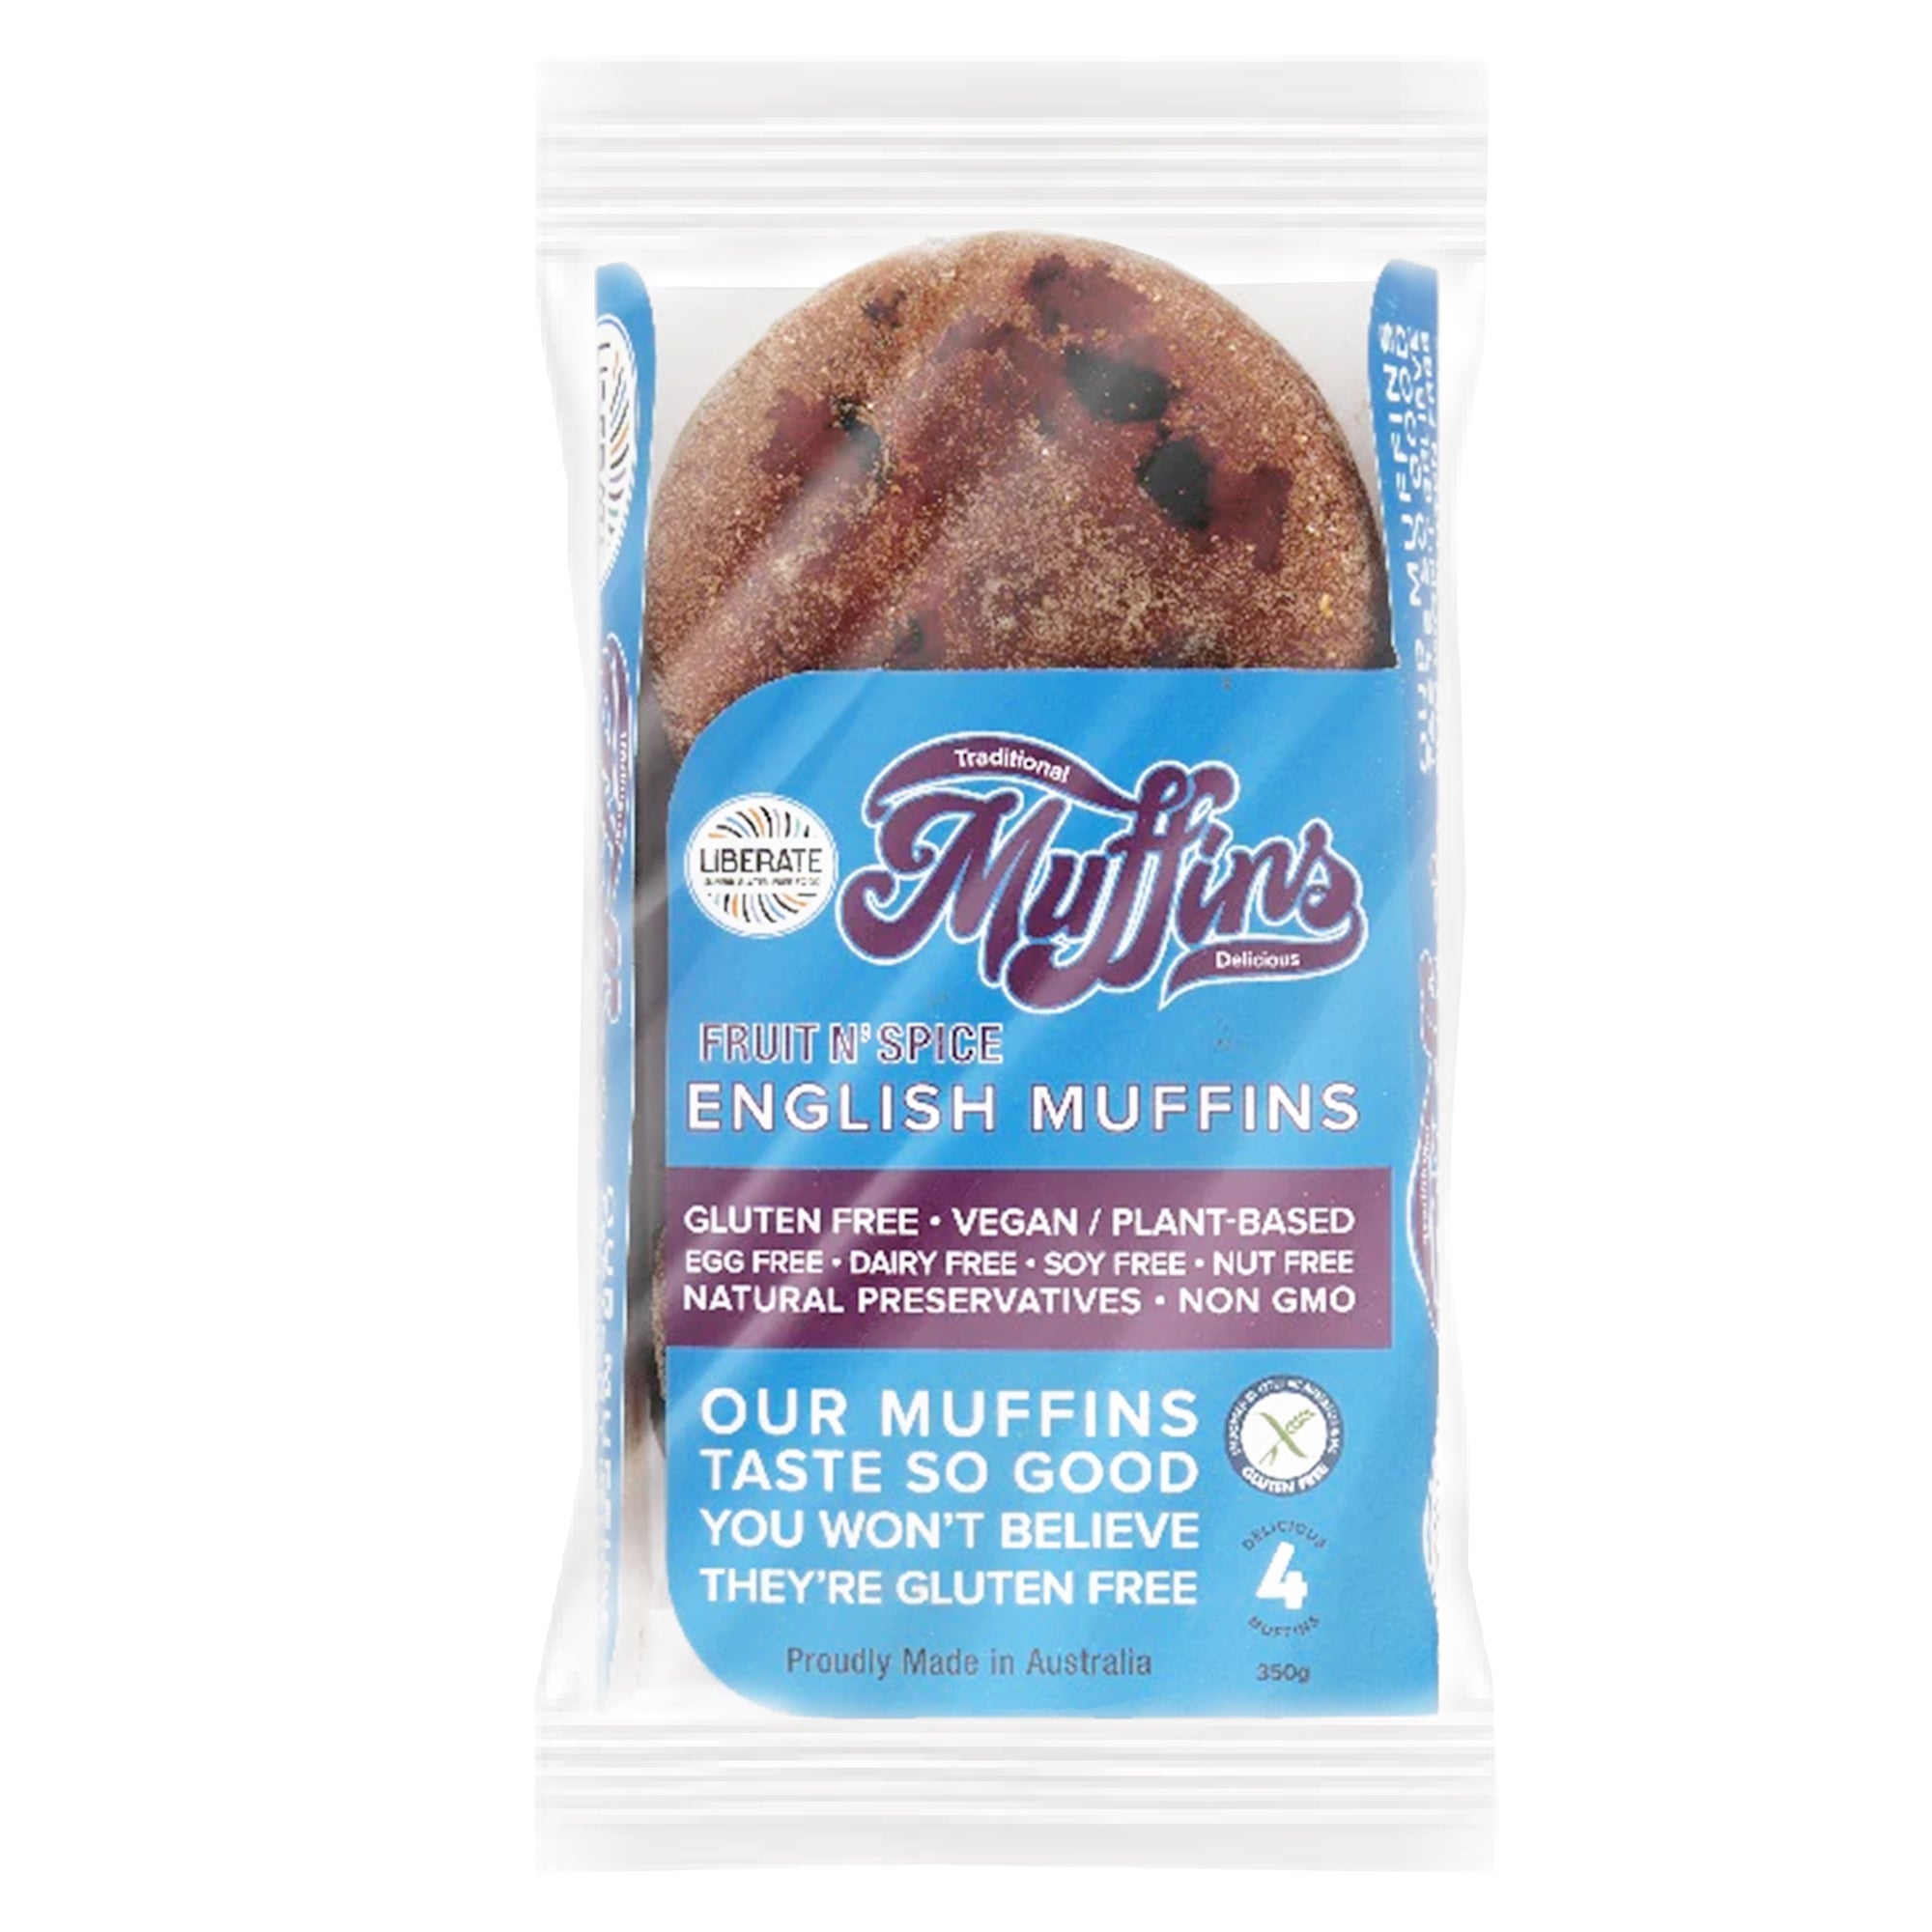 Liberate - English Muffins - Fruit N' Spice (4) 340g